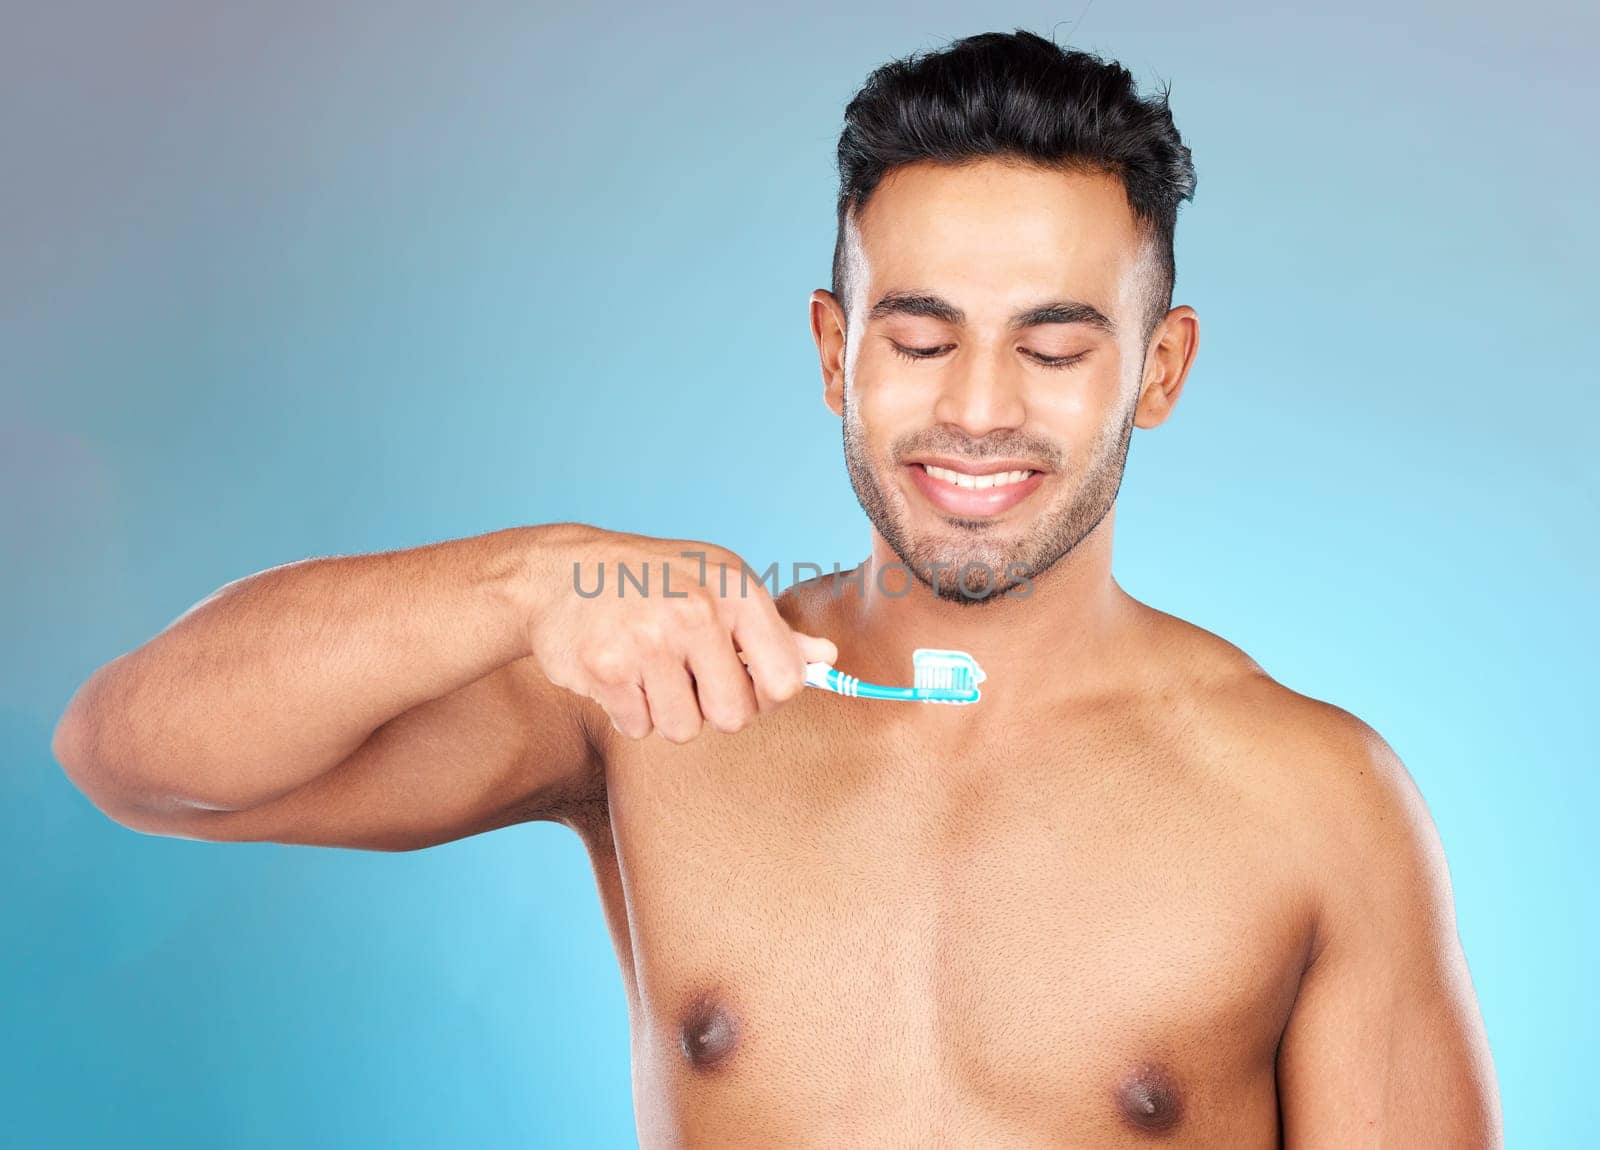 Teeth, dental care and man brushing teeth with toothbrush and toothpaste on blue background with smile on face. Morning routine, healthcare and fresh, happy male model from India in studio portrait. by YuriArcurs